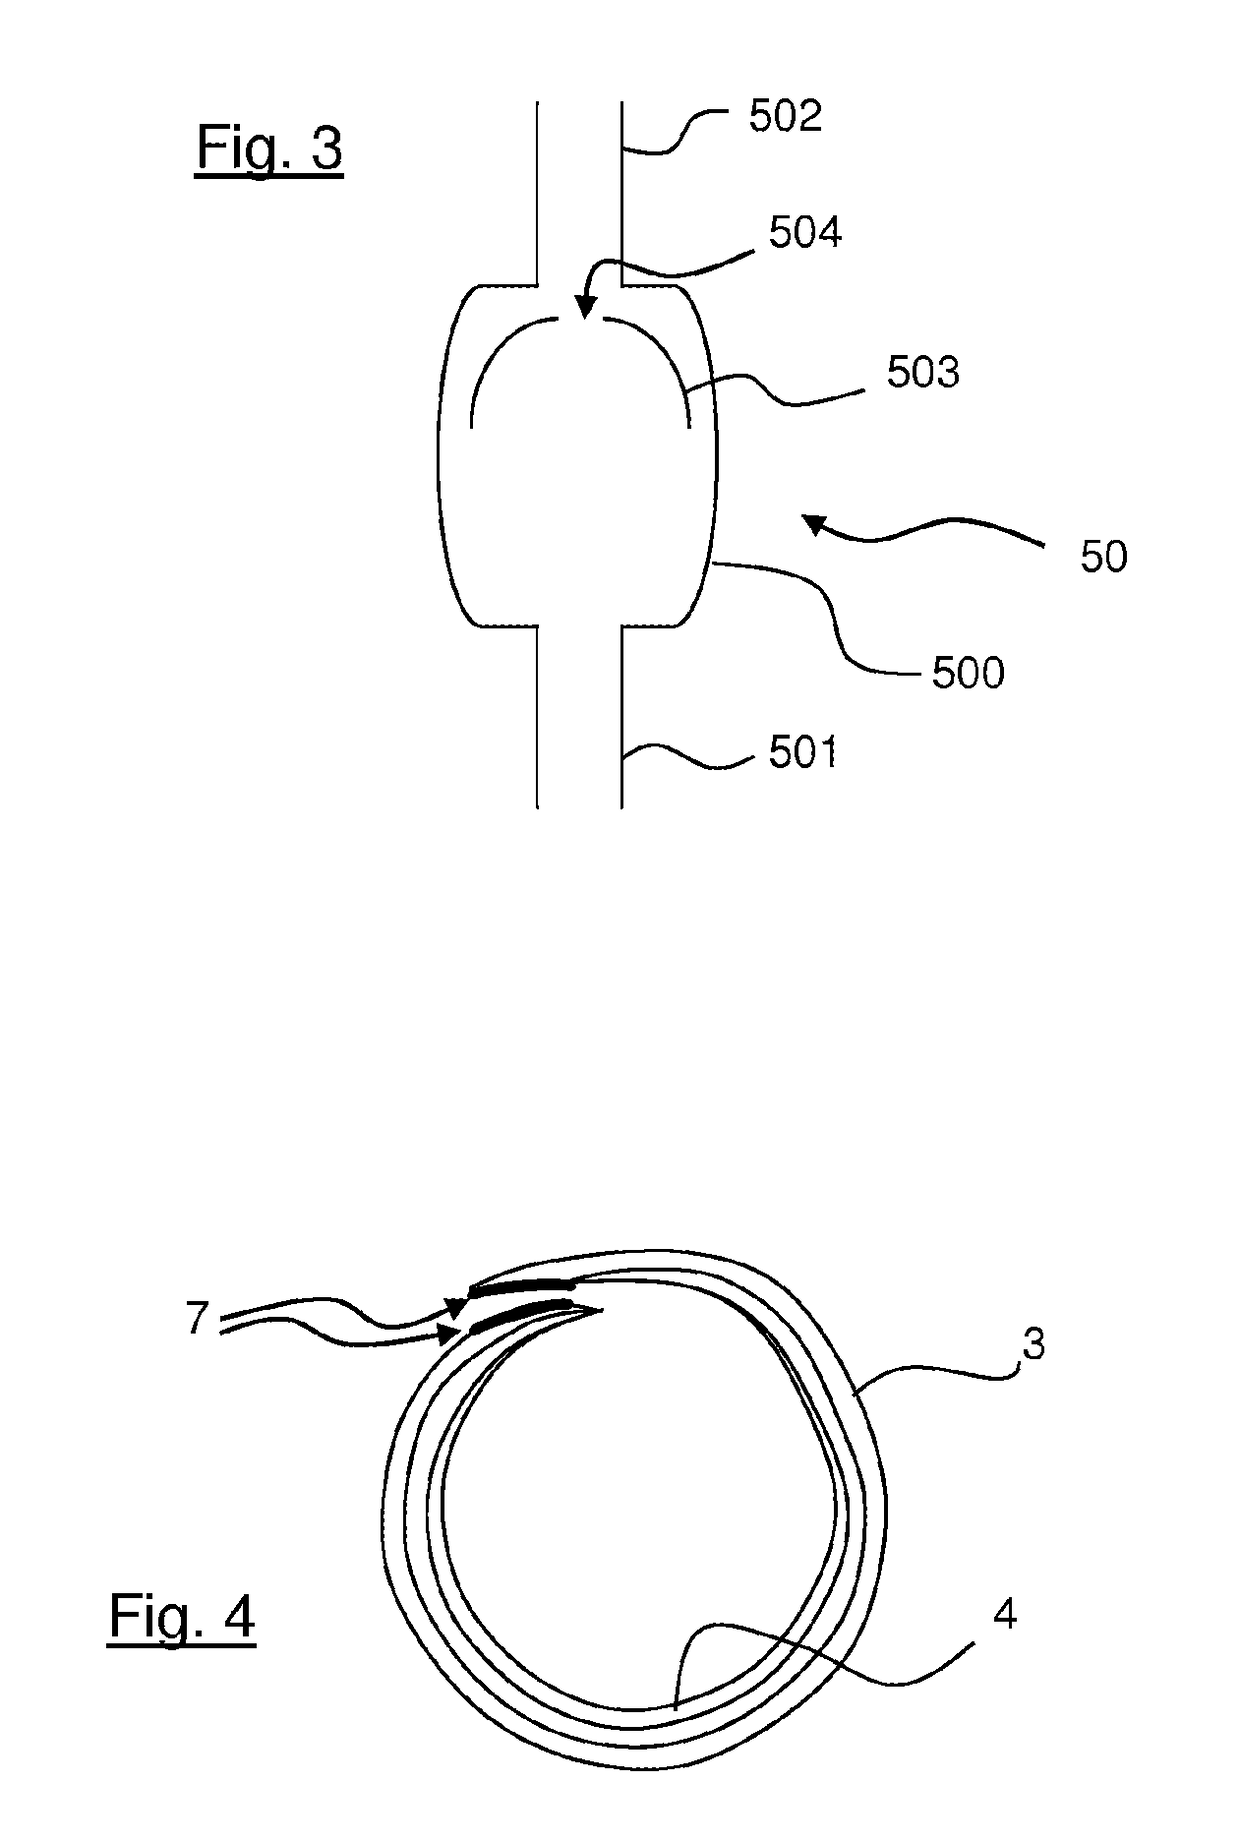 Massage apparatus comprising a stack of inflatable and deflatable cells inclined and overlapping one another